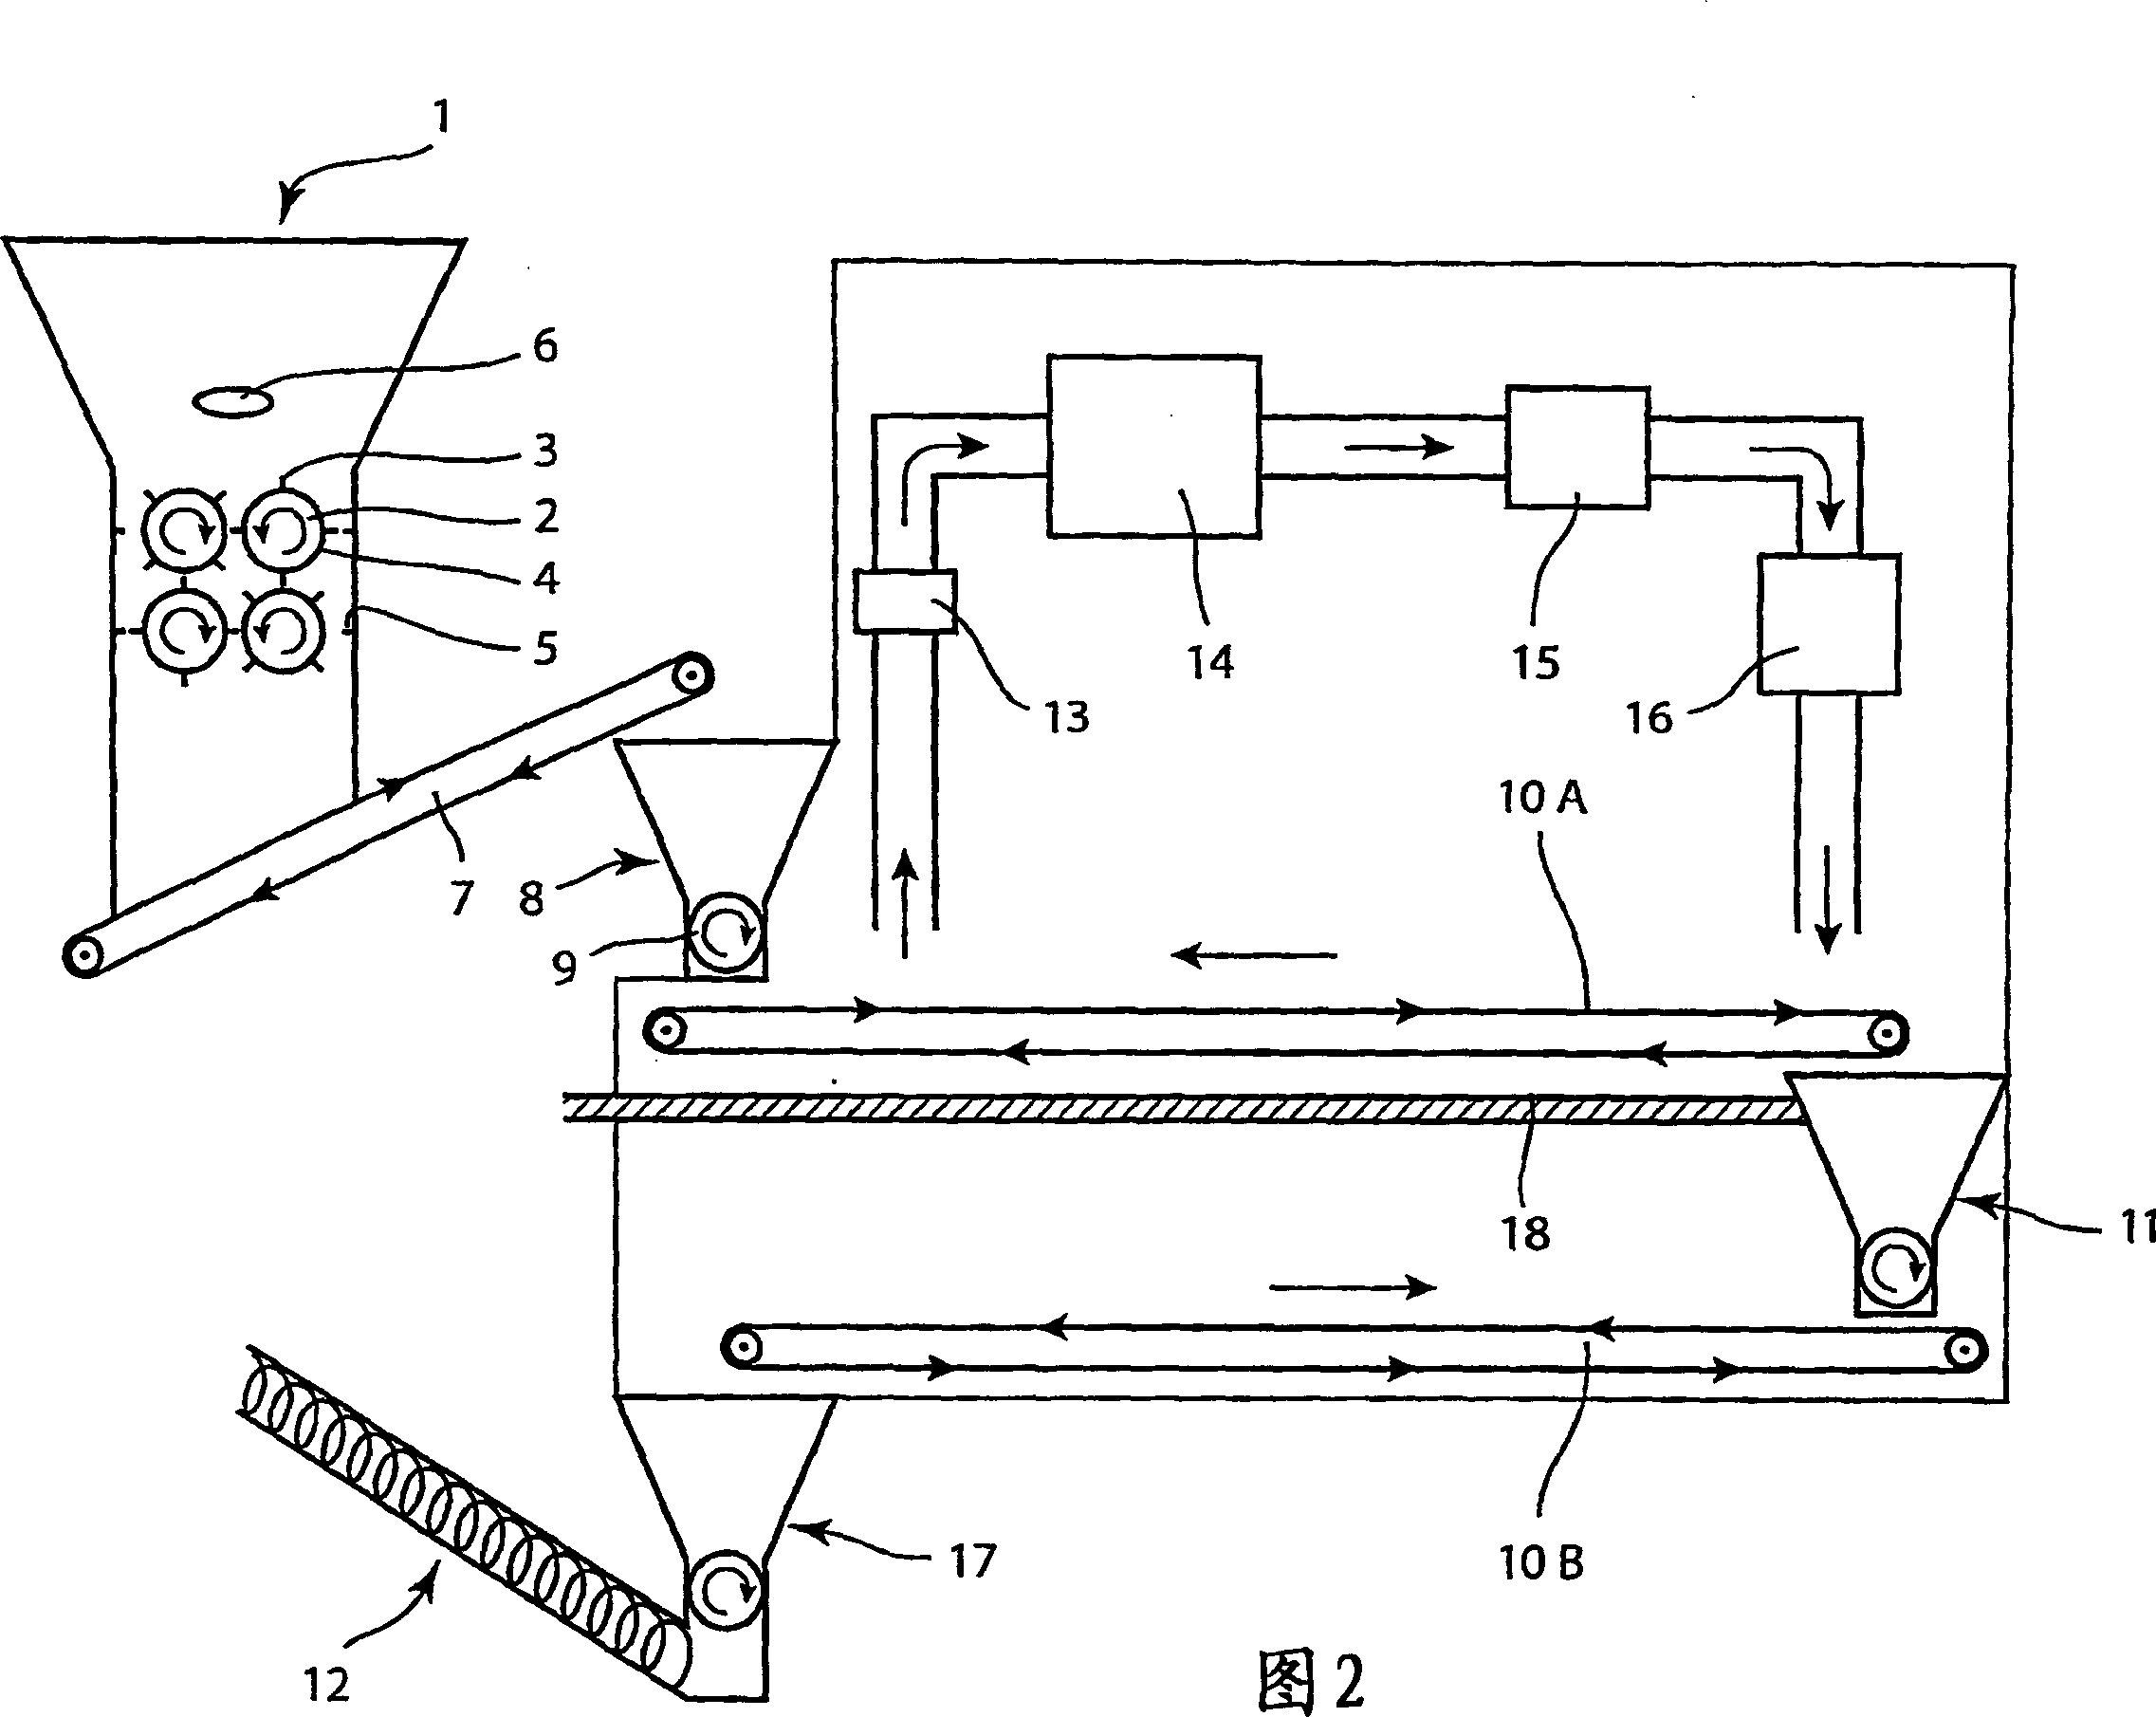 Device for drying material